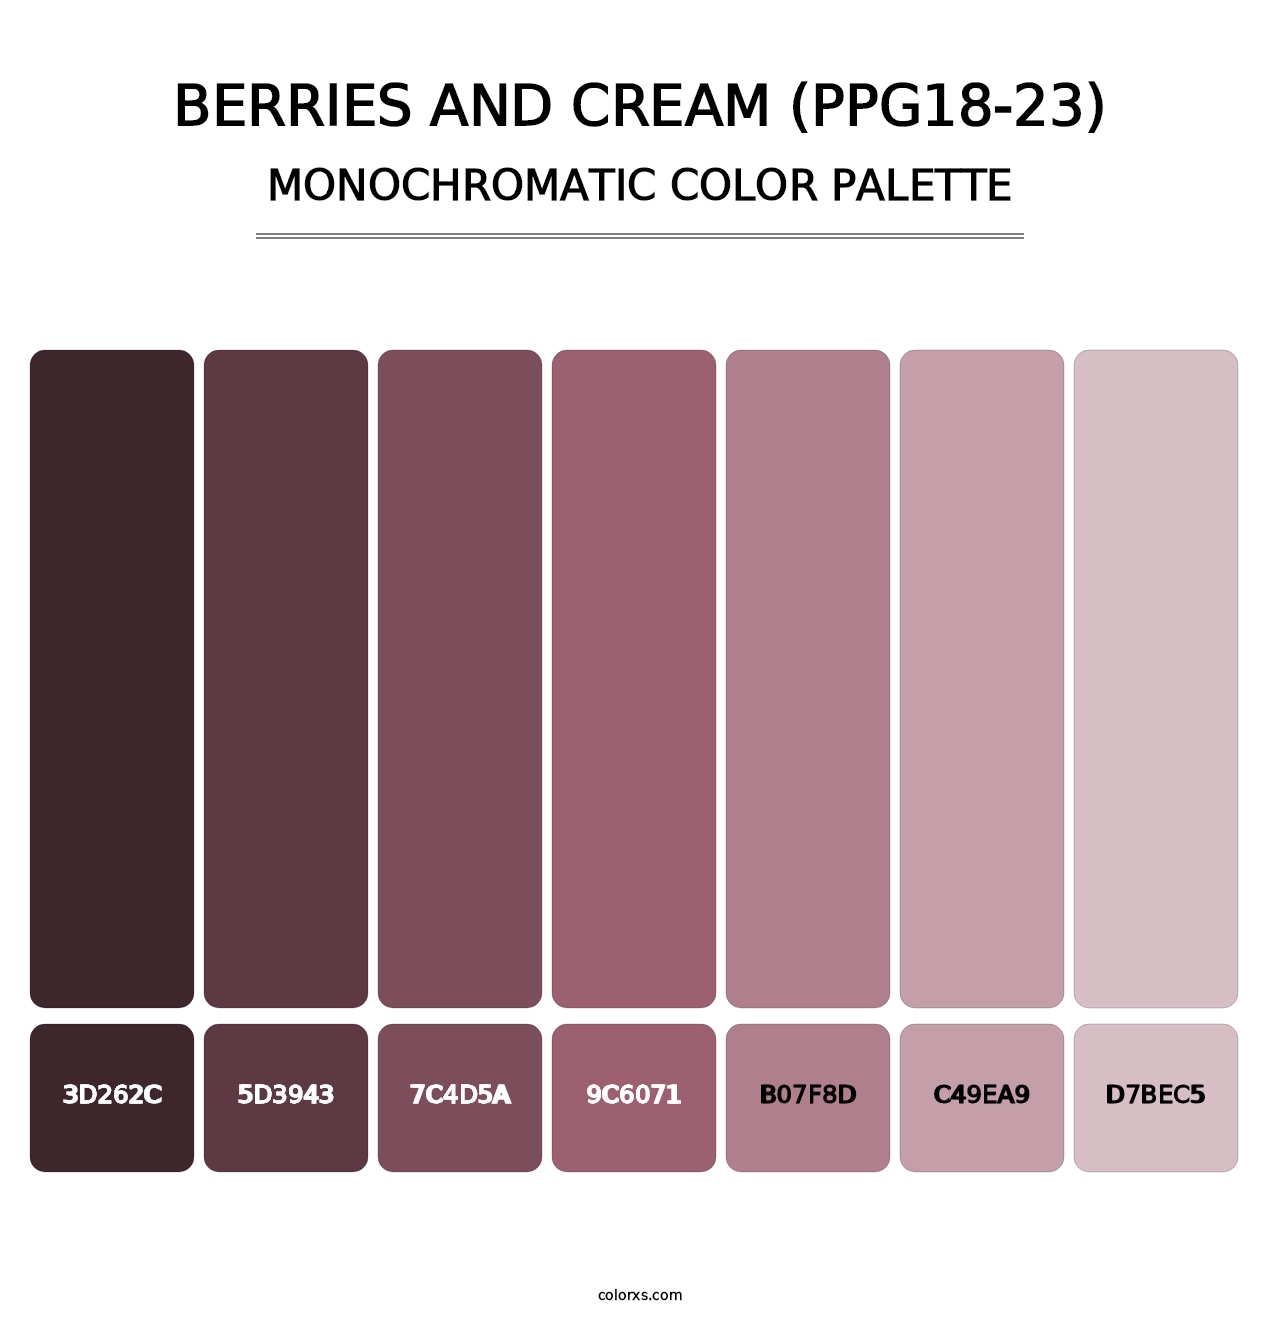 Berries And Cream (PPG18-23) - Monochromatic Color Palette